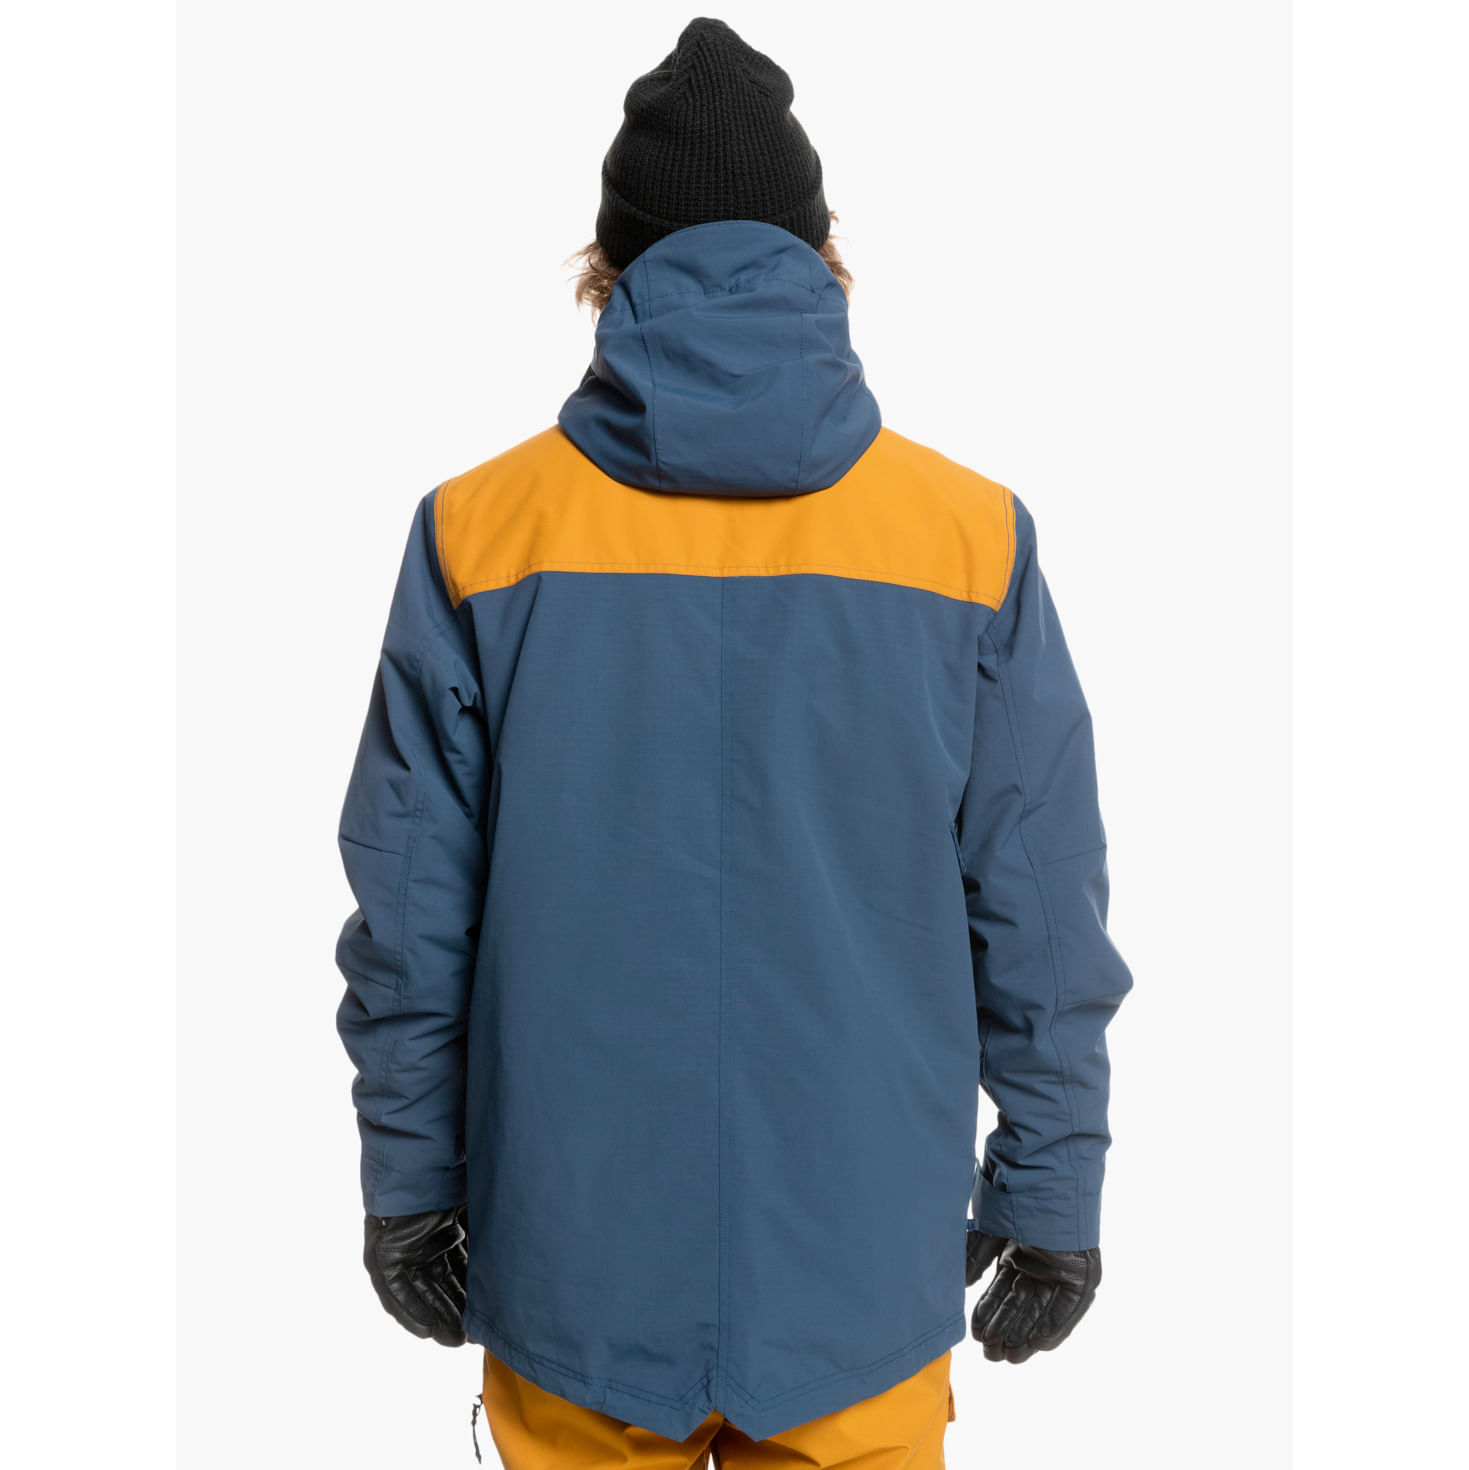 Quiksilver Fairbanks Insulated Jacket Quick Delivery Sale At 62% ...